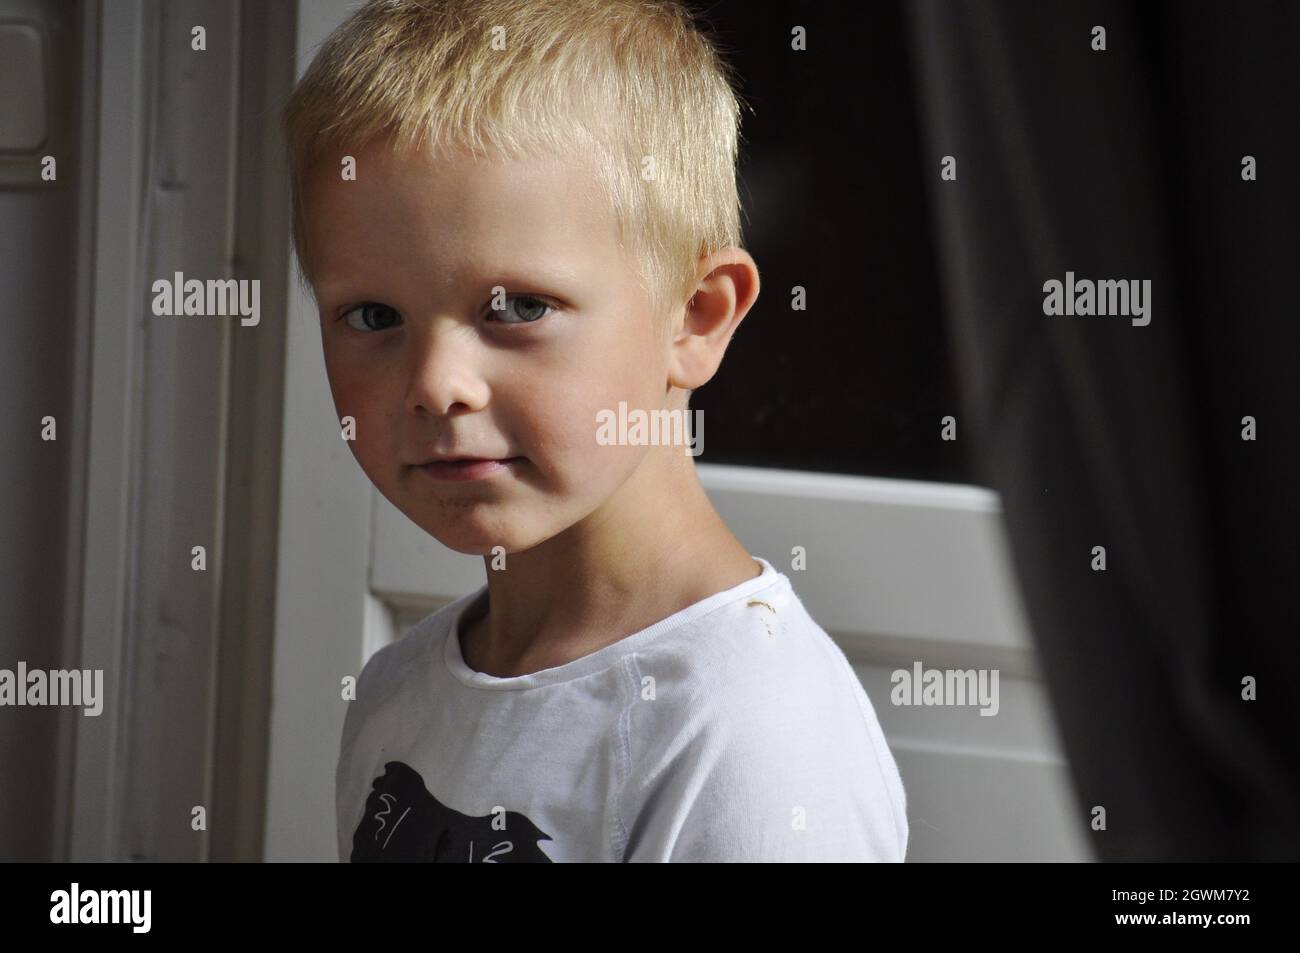 Portrait Of Cute Boy At Home Stock Photo